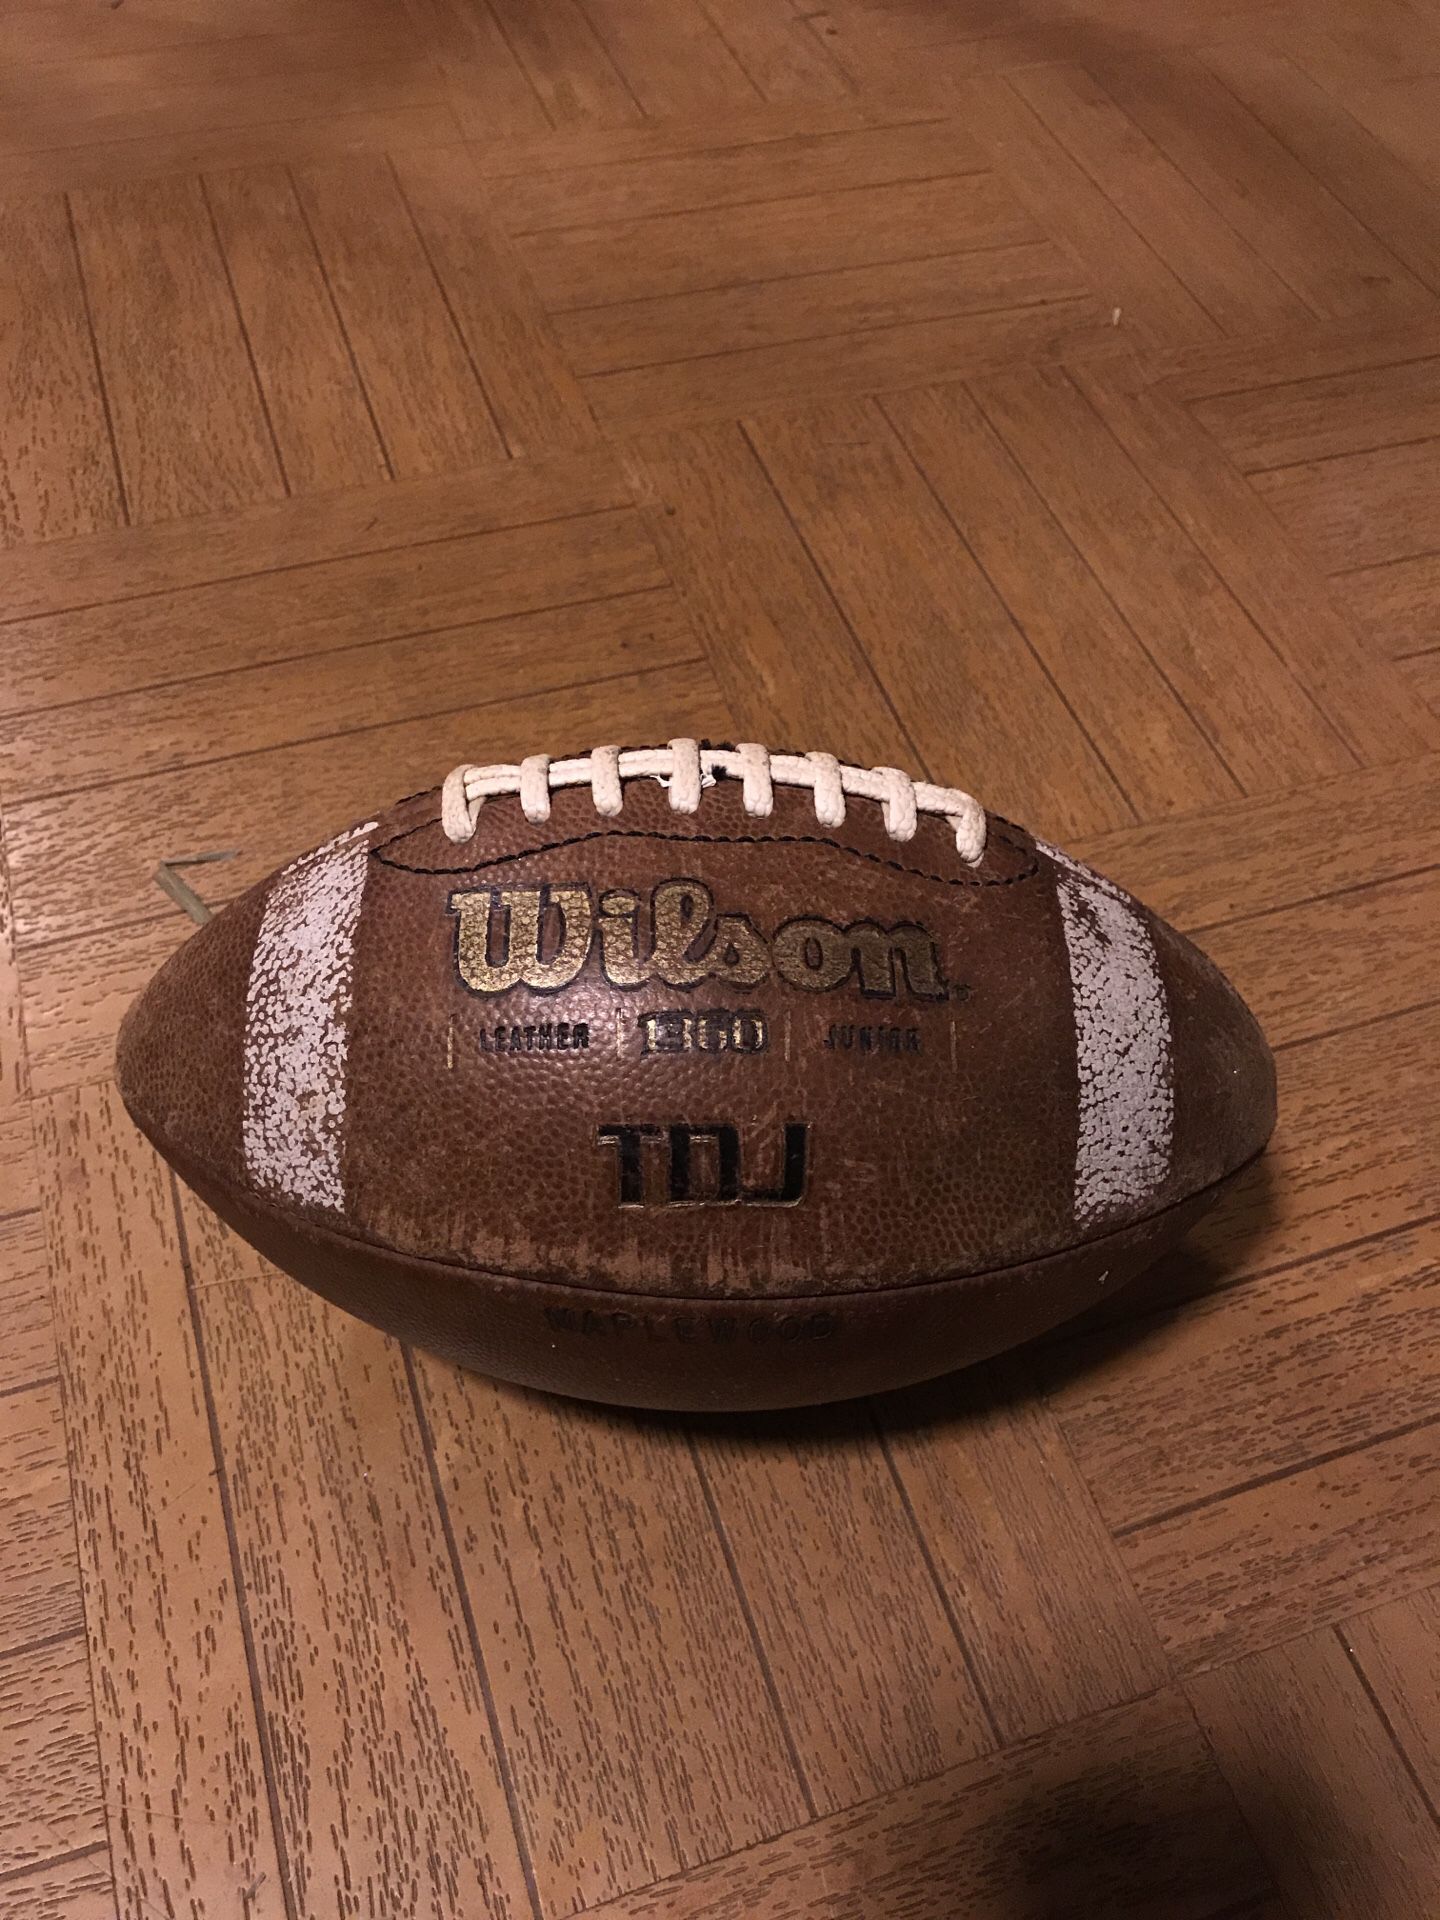 Used Wilson football but is still in a new condition.